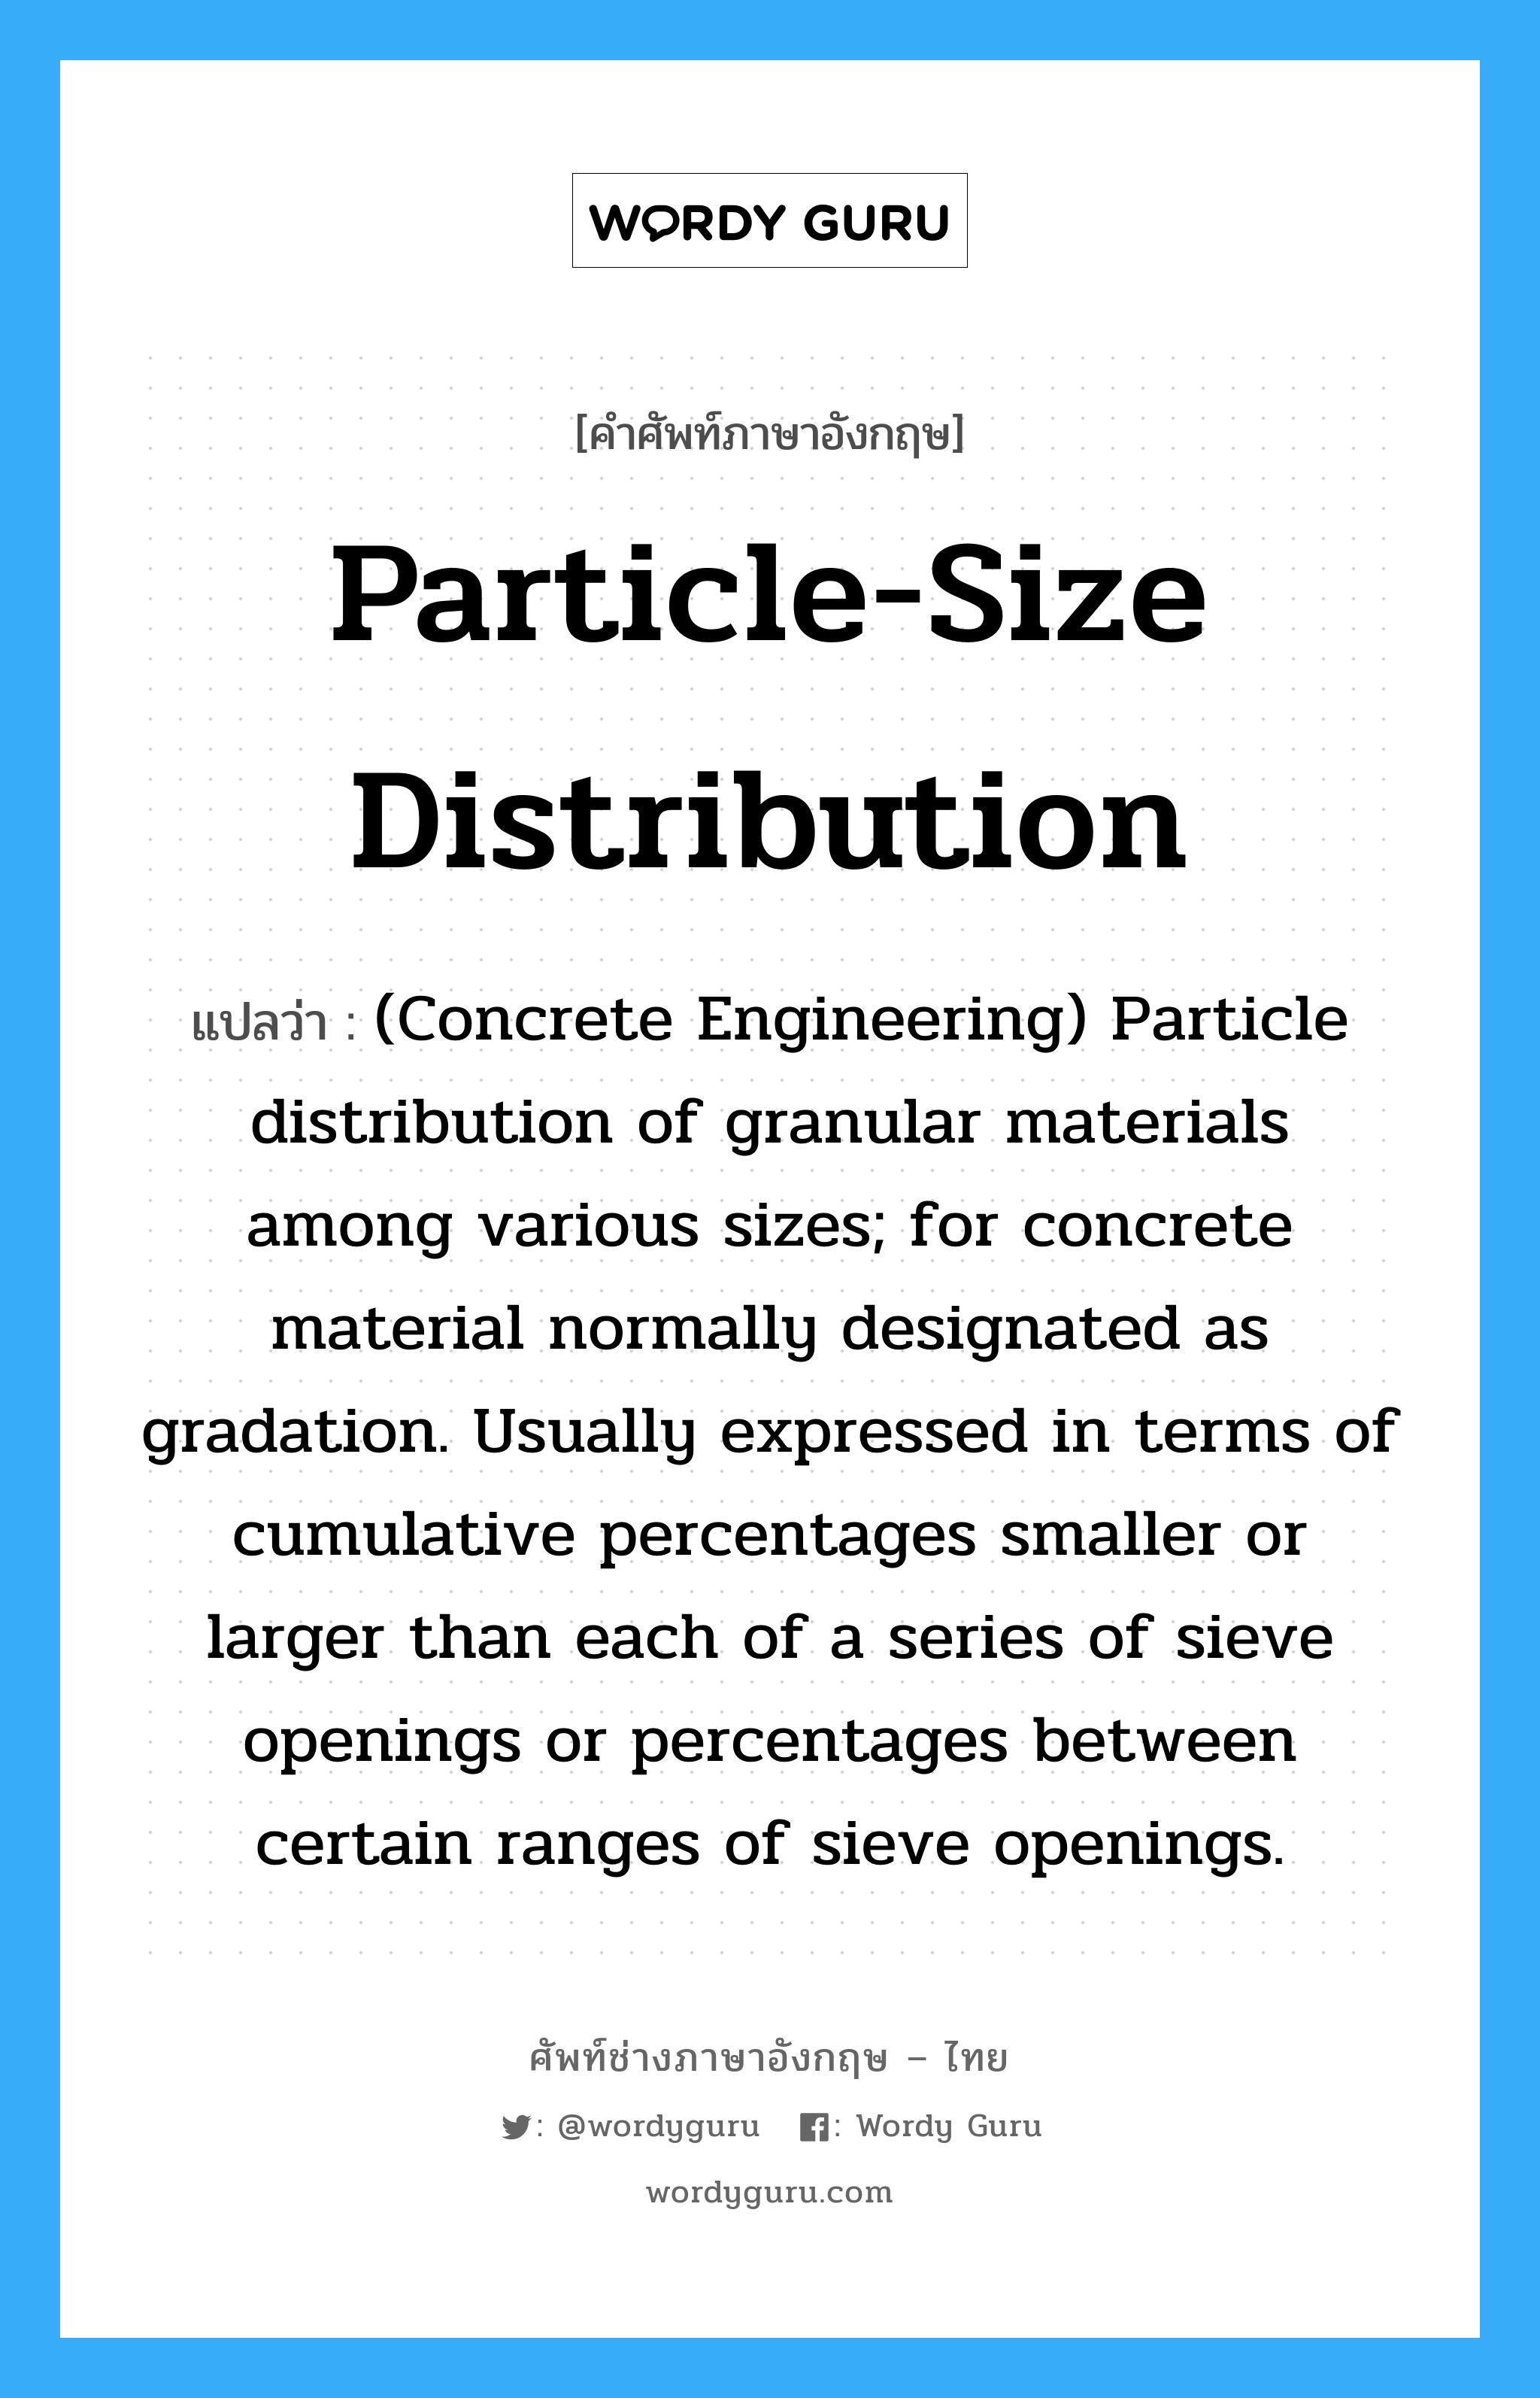 (Concrete Engineering) Particle distribution of granular materials among various sizes; for concrete material normally designated as gradation. Usually expressed in terms of cumulative percentages smaller or larger than each of a series of sieve openings or percentages between certain ranges of sieve openings. ภาษาอังกฤษ?, คำศัพท์ช่างภาษาอังกฤษ - ไทย (Concrete Engineering) Particle distribution of granular materials among various sizes; for concrete material normally designated as gradation. Usually expressed in terms of cumulative percentages smaller or larger than each of a series of sieve openings or percentages between certain ranges of sieve openings. คำศัพท์ภาษาอังกฤษ (Concrete Engineering) Particle distribution of granular materials among various sizes; for concrete material normally designated as gradation. Usually expressed in terms of cumulative percentages smaller or larger than each of a series of sieve openings or percentages between certain ranges of sieve openings. แปลว่า Particle-Size Distribution